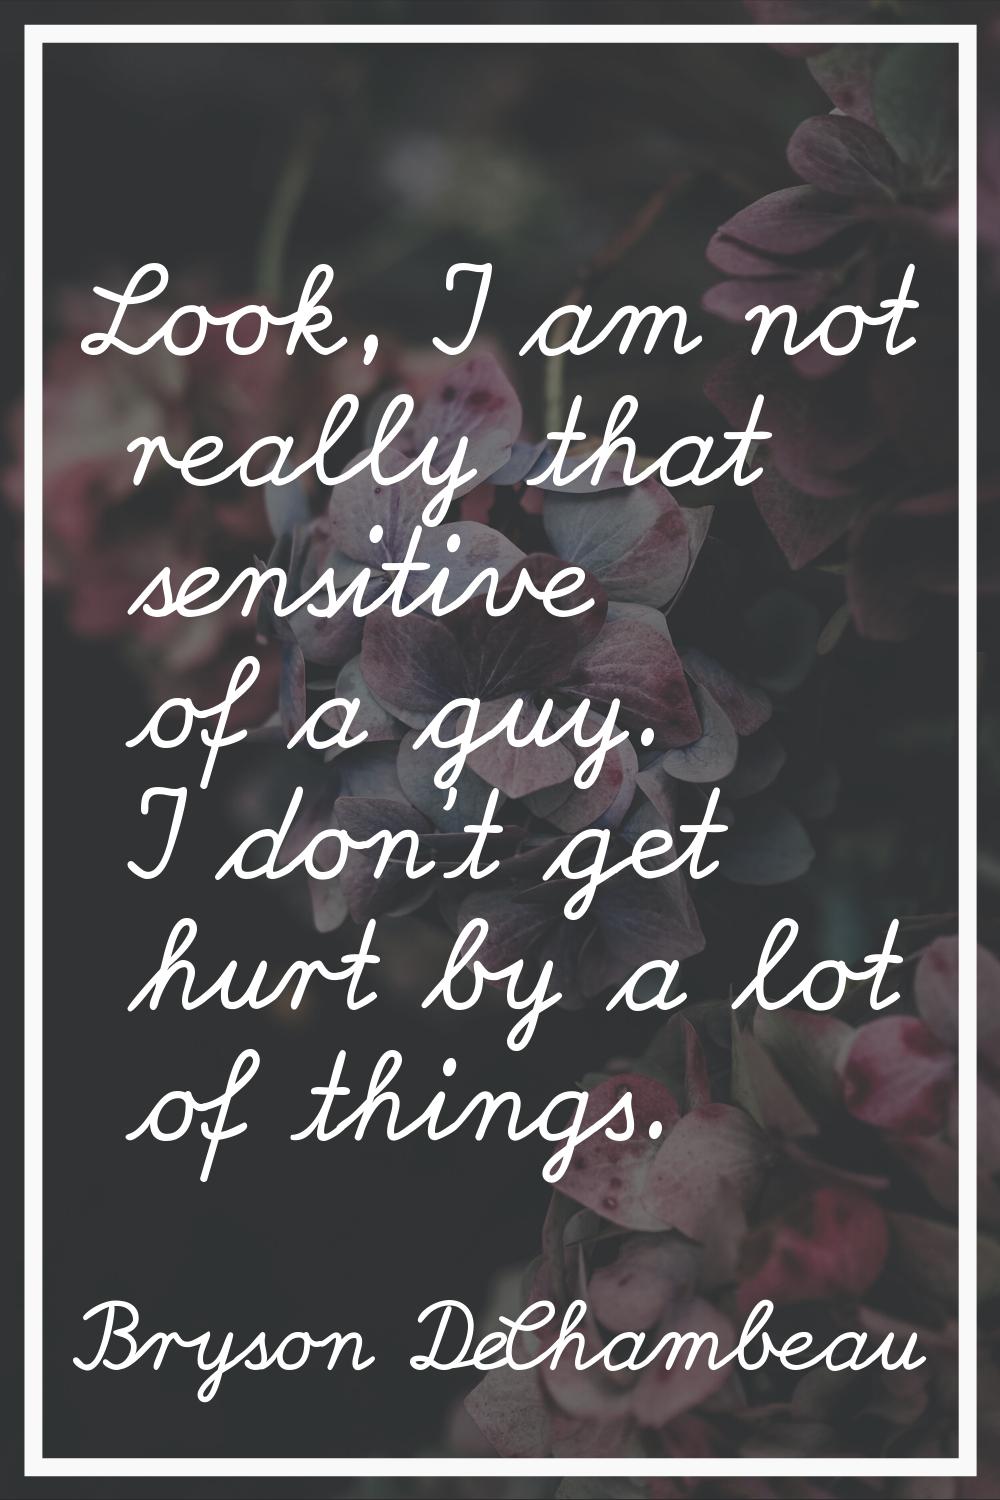 Look, I am not really that sensitive of a guy. I don't get hurt by a lot of things.